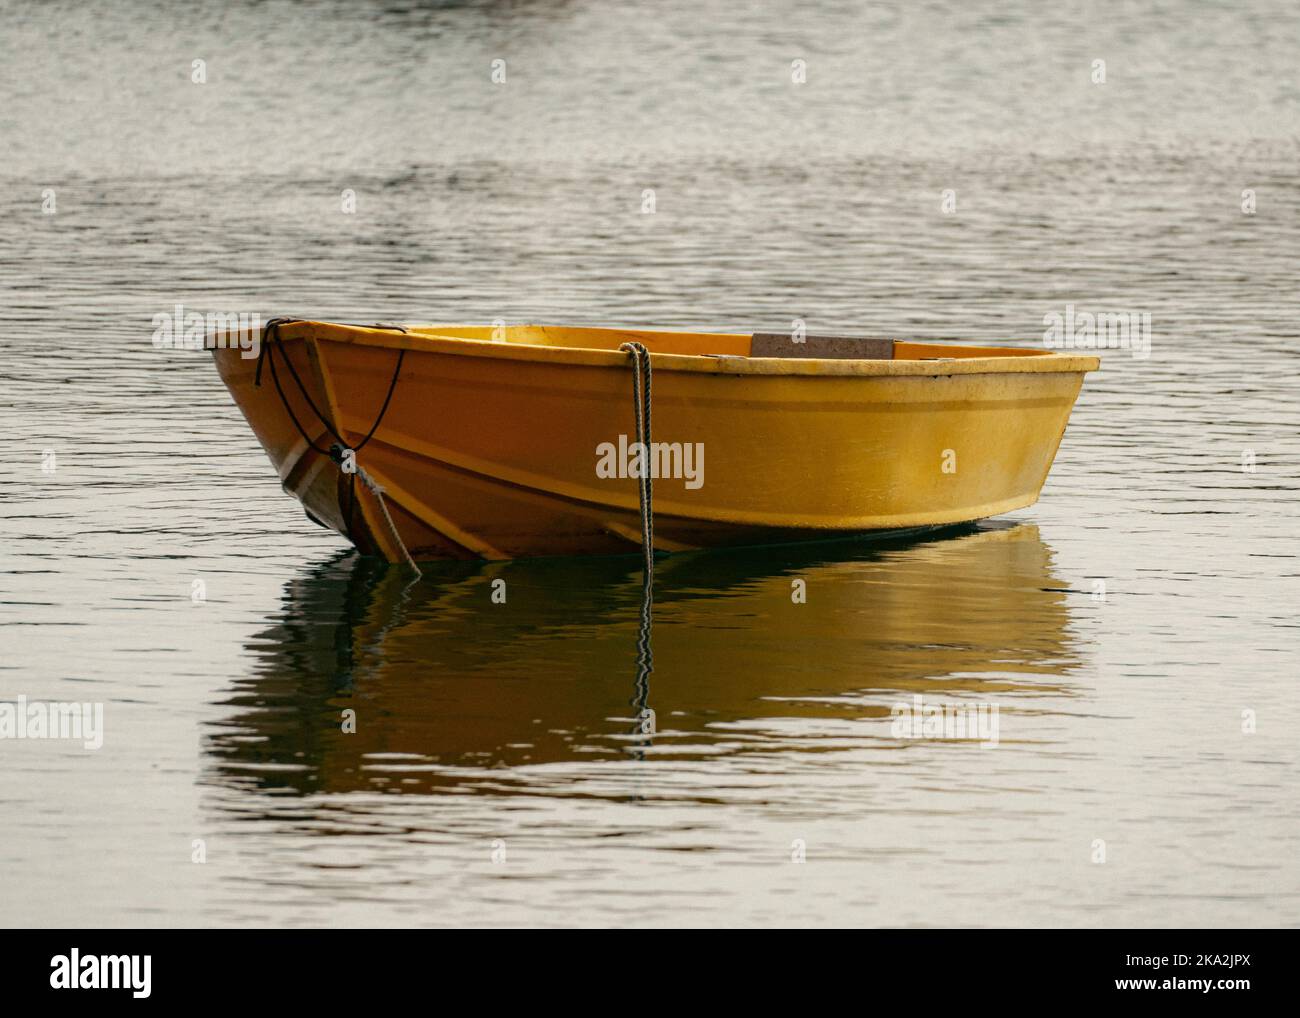 The yellow single fishing boat in the pond, close-up Stock Photo - Alamy